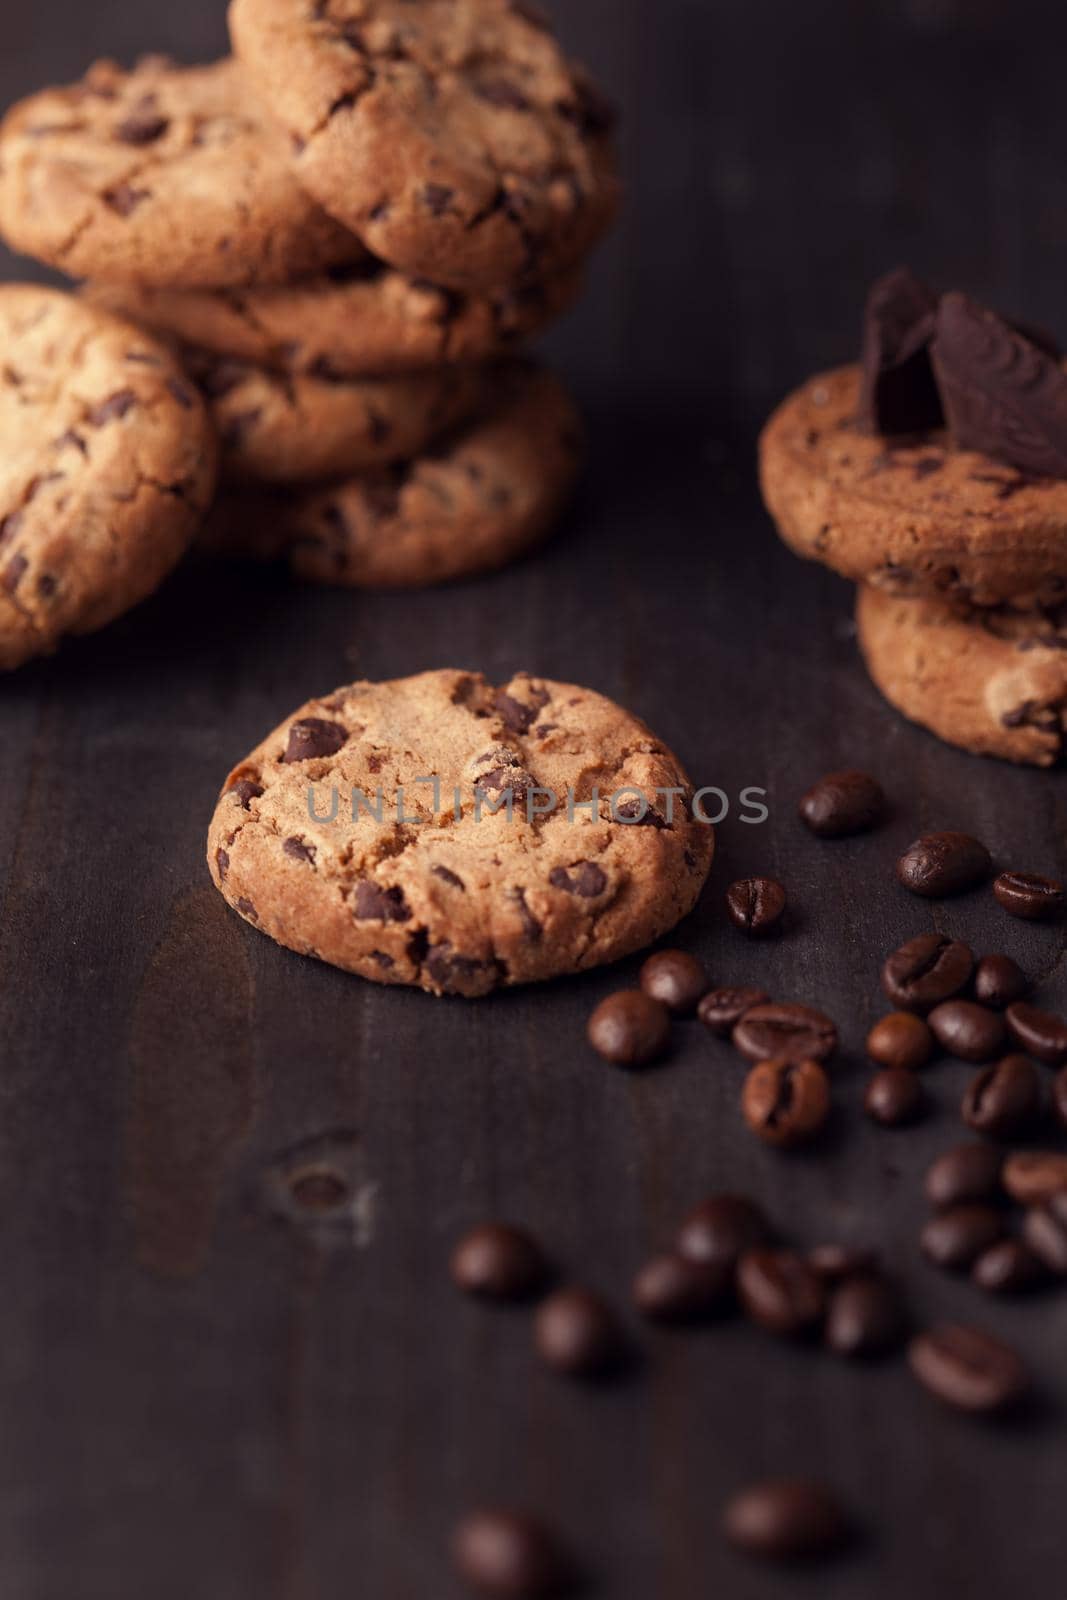 Chocolate chip cookies on old wooden table with coffee beans. Homemade snack.